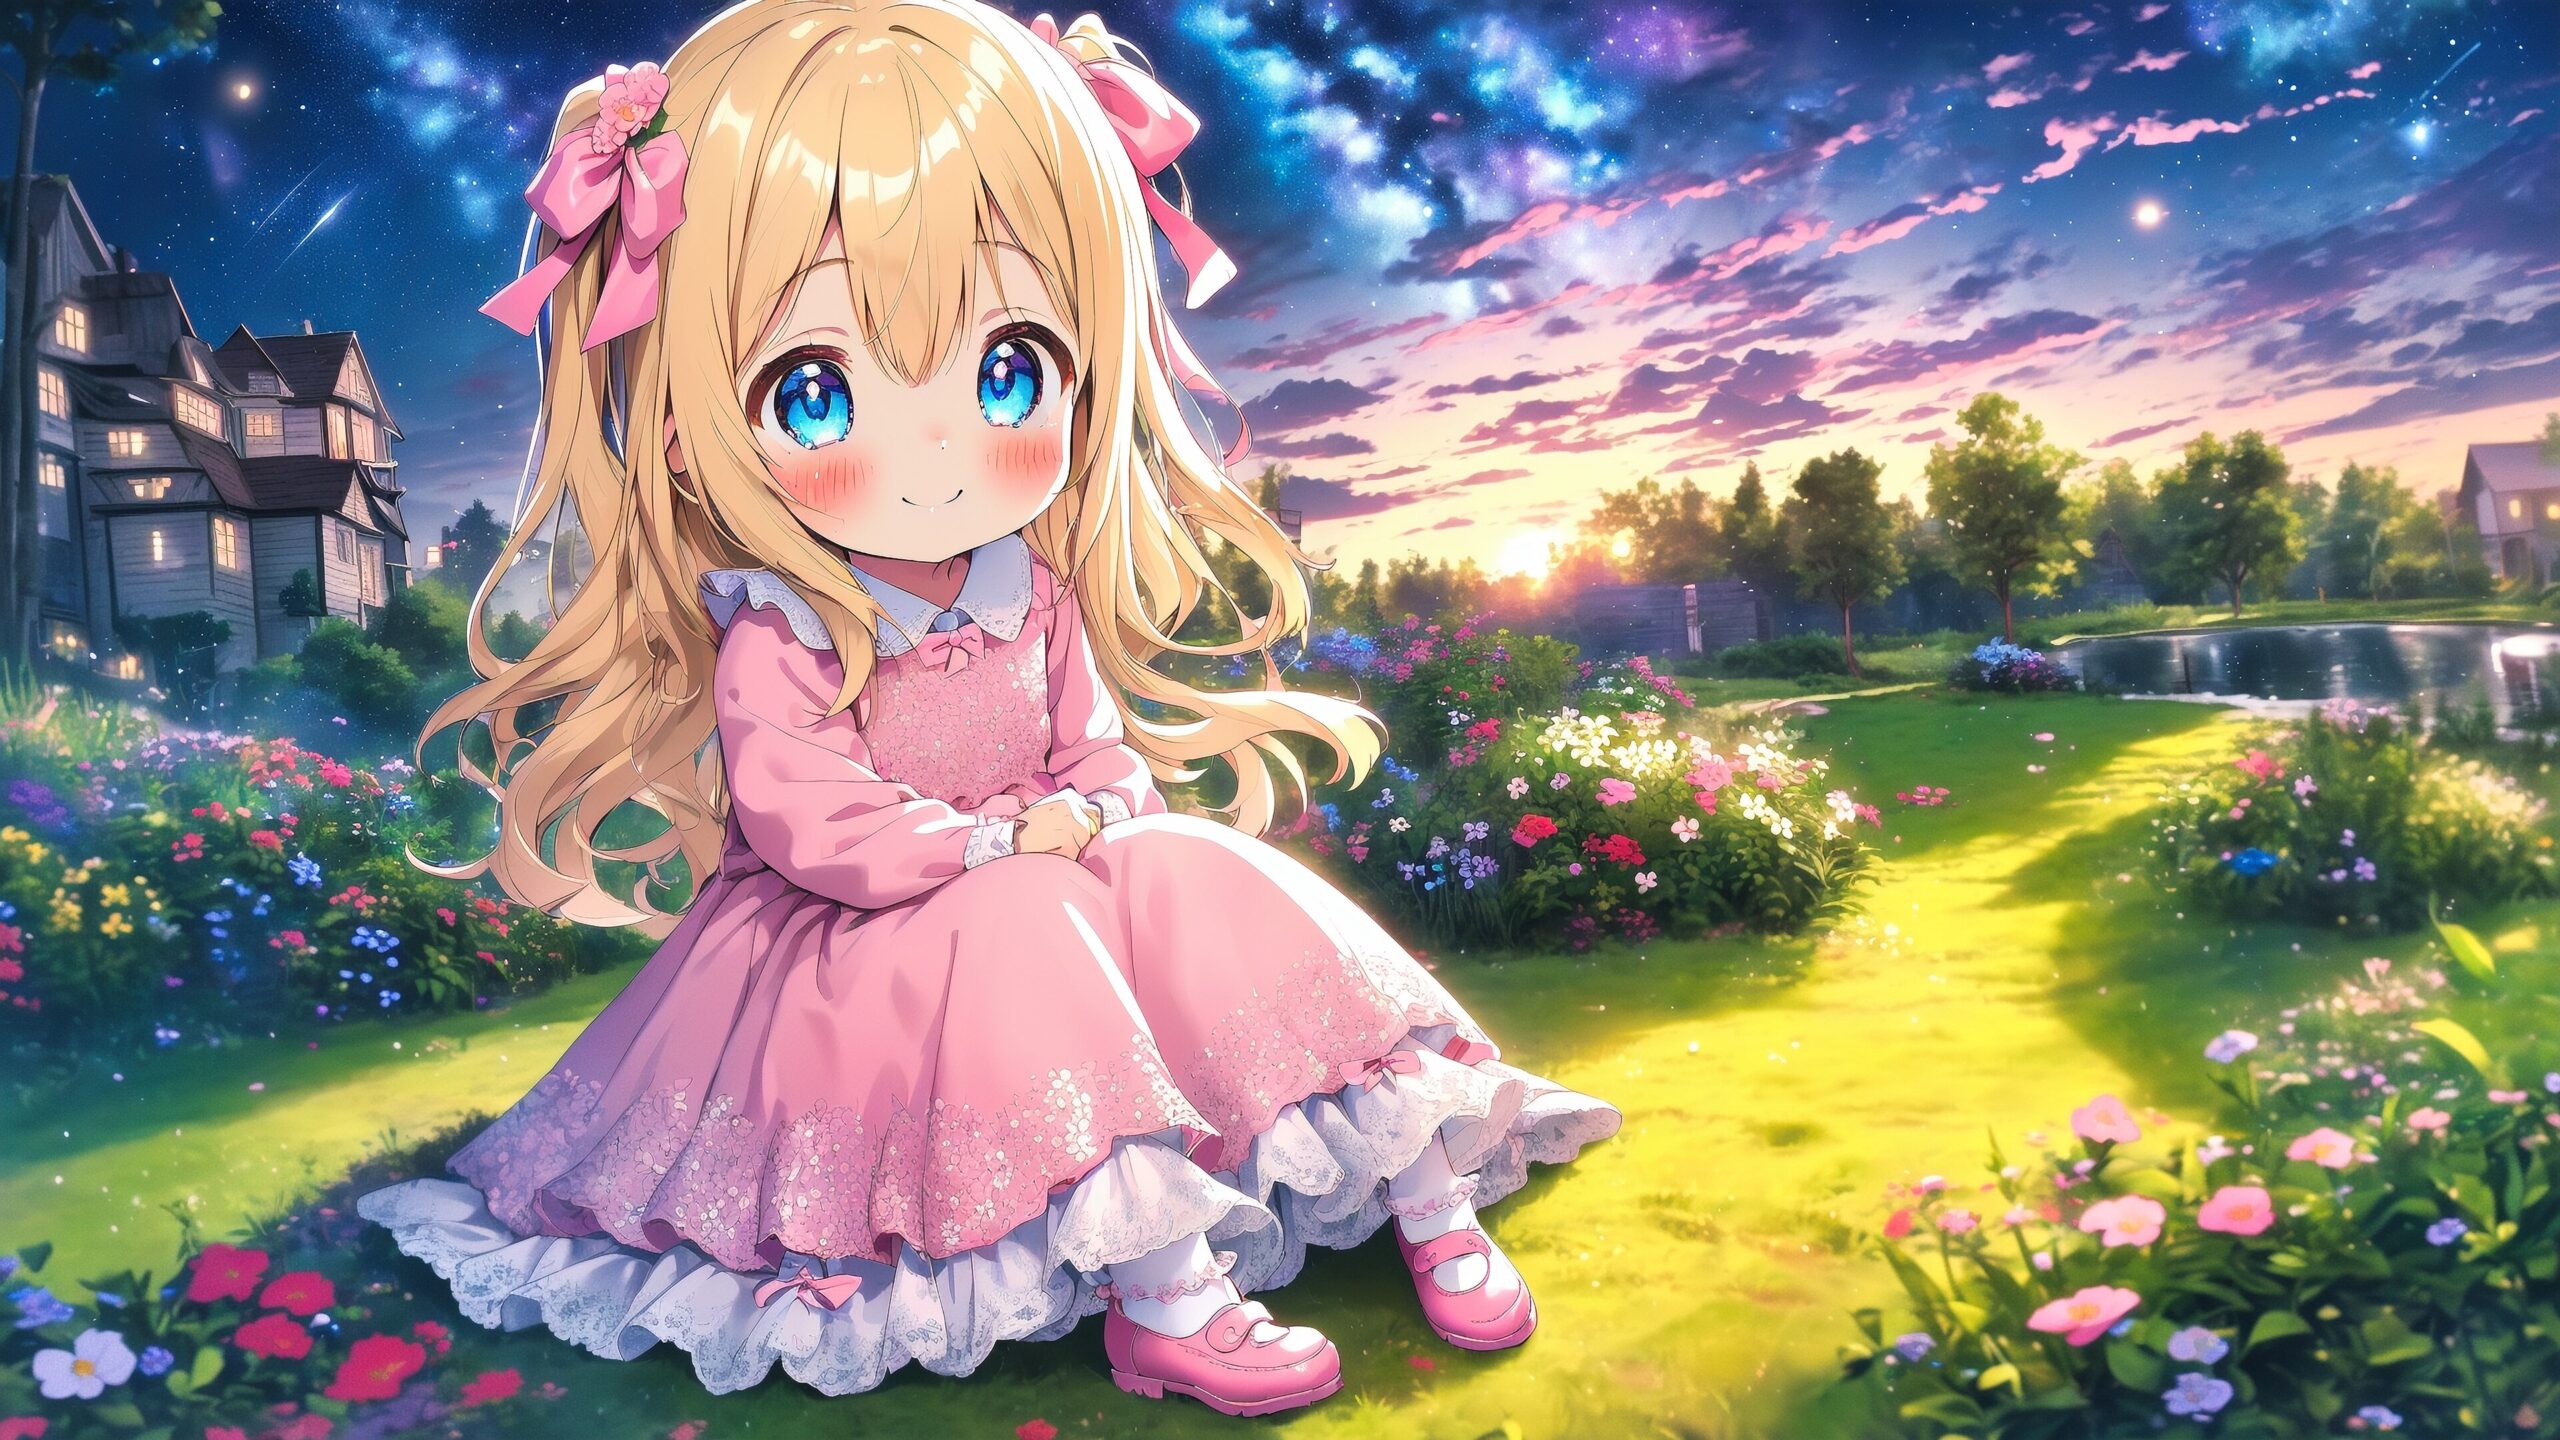 4K Wallpapers) Blonde girl in a dress, under the night sky - zzz's